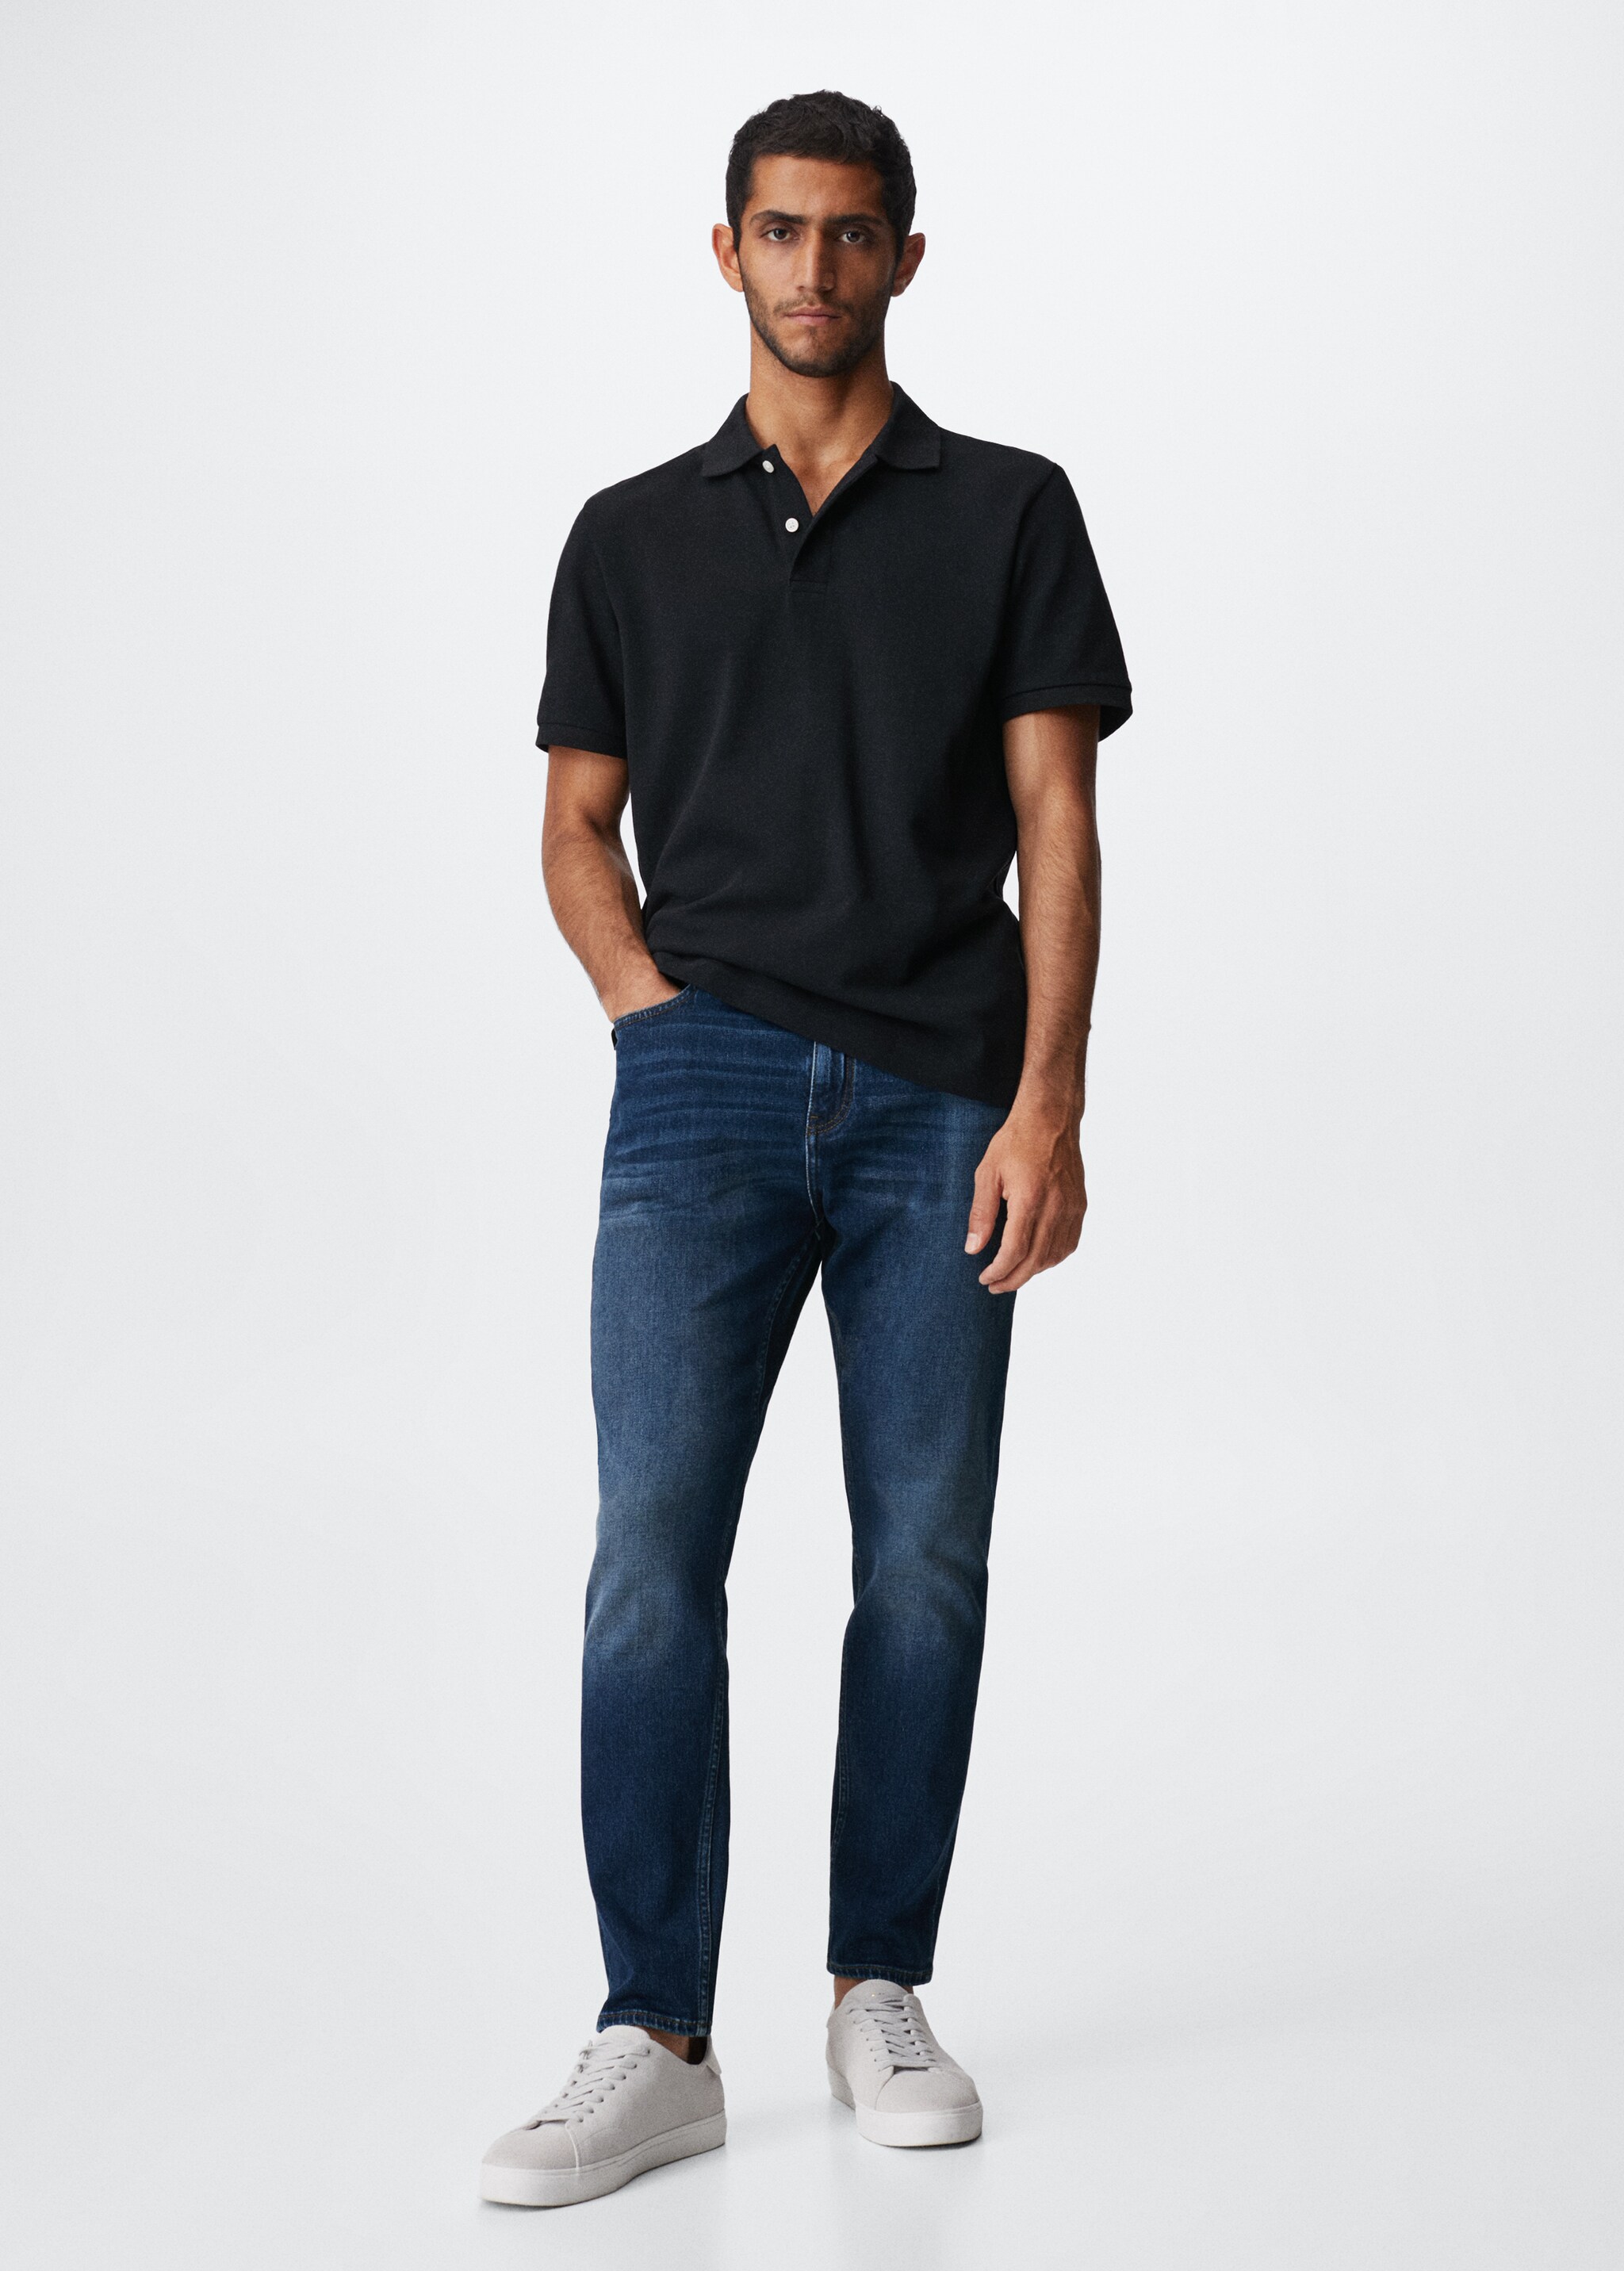 Jeans Tom tapered fit - Plano general